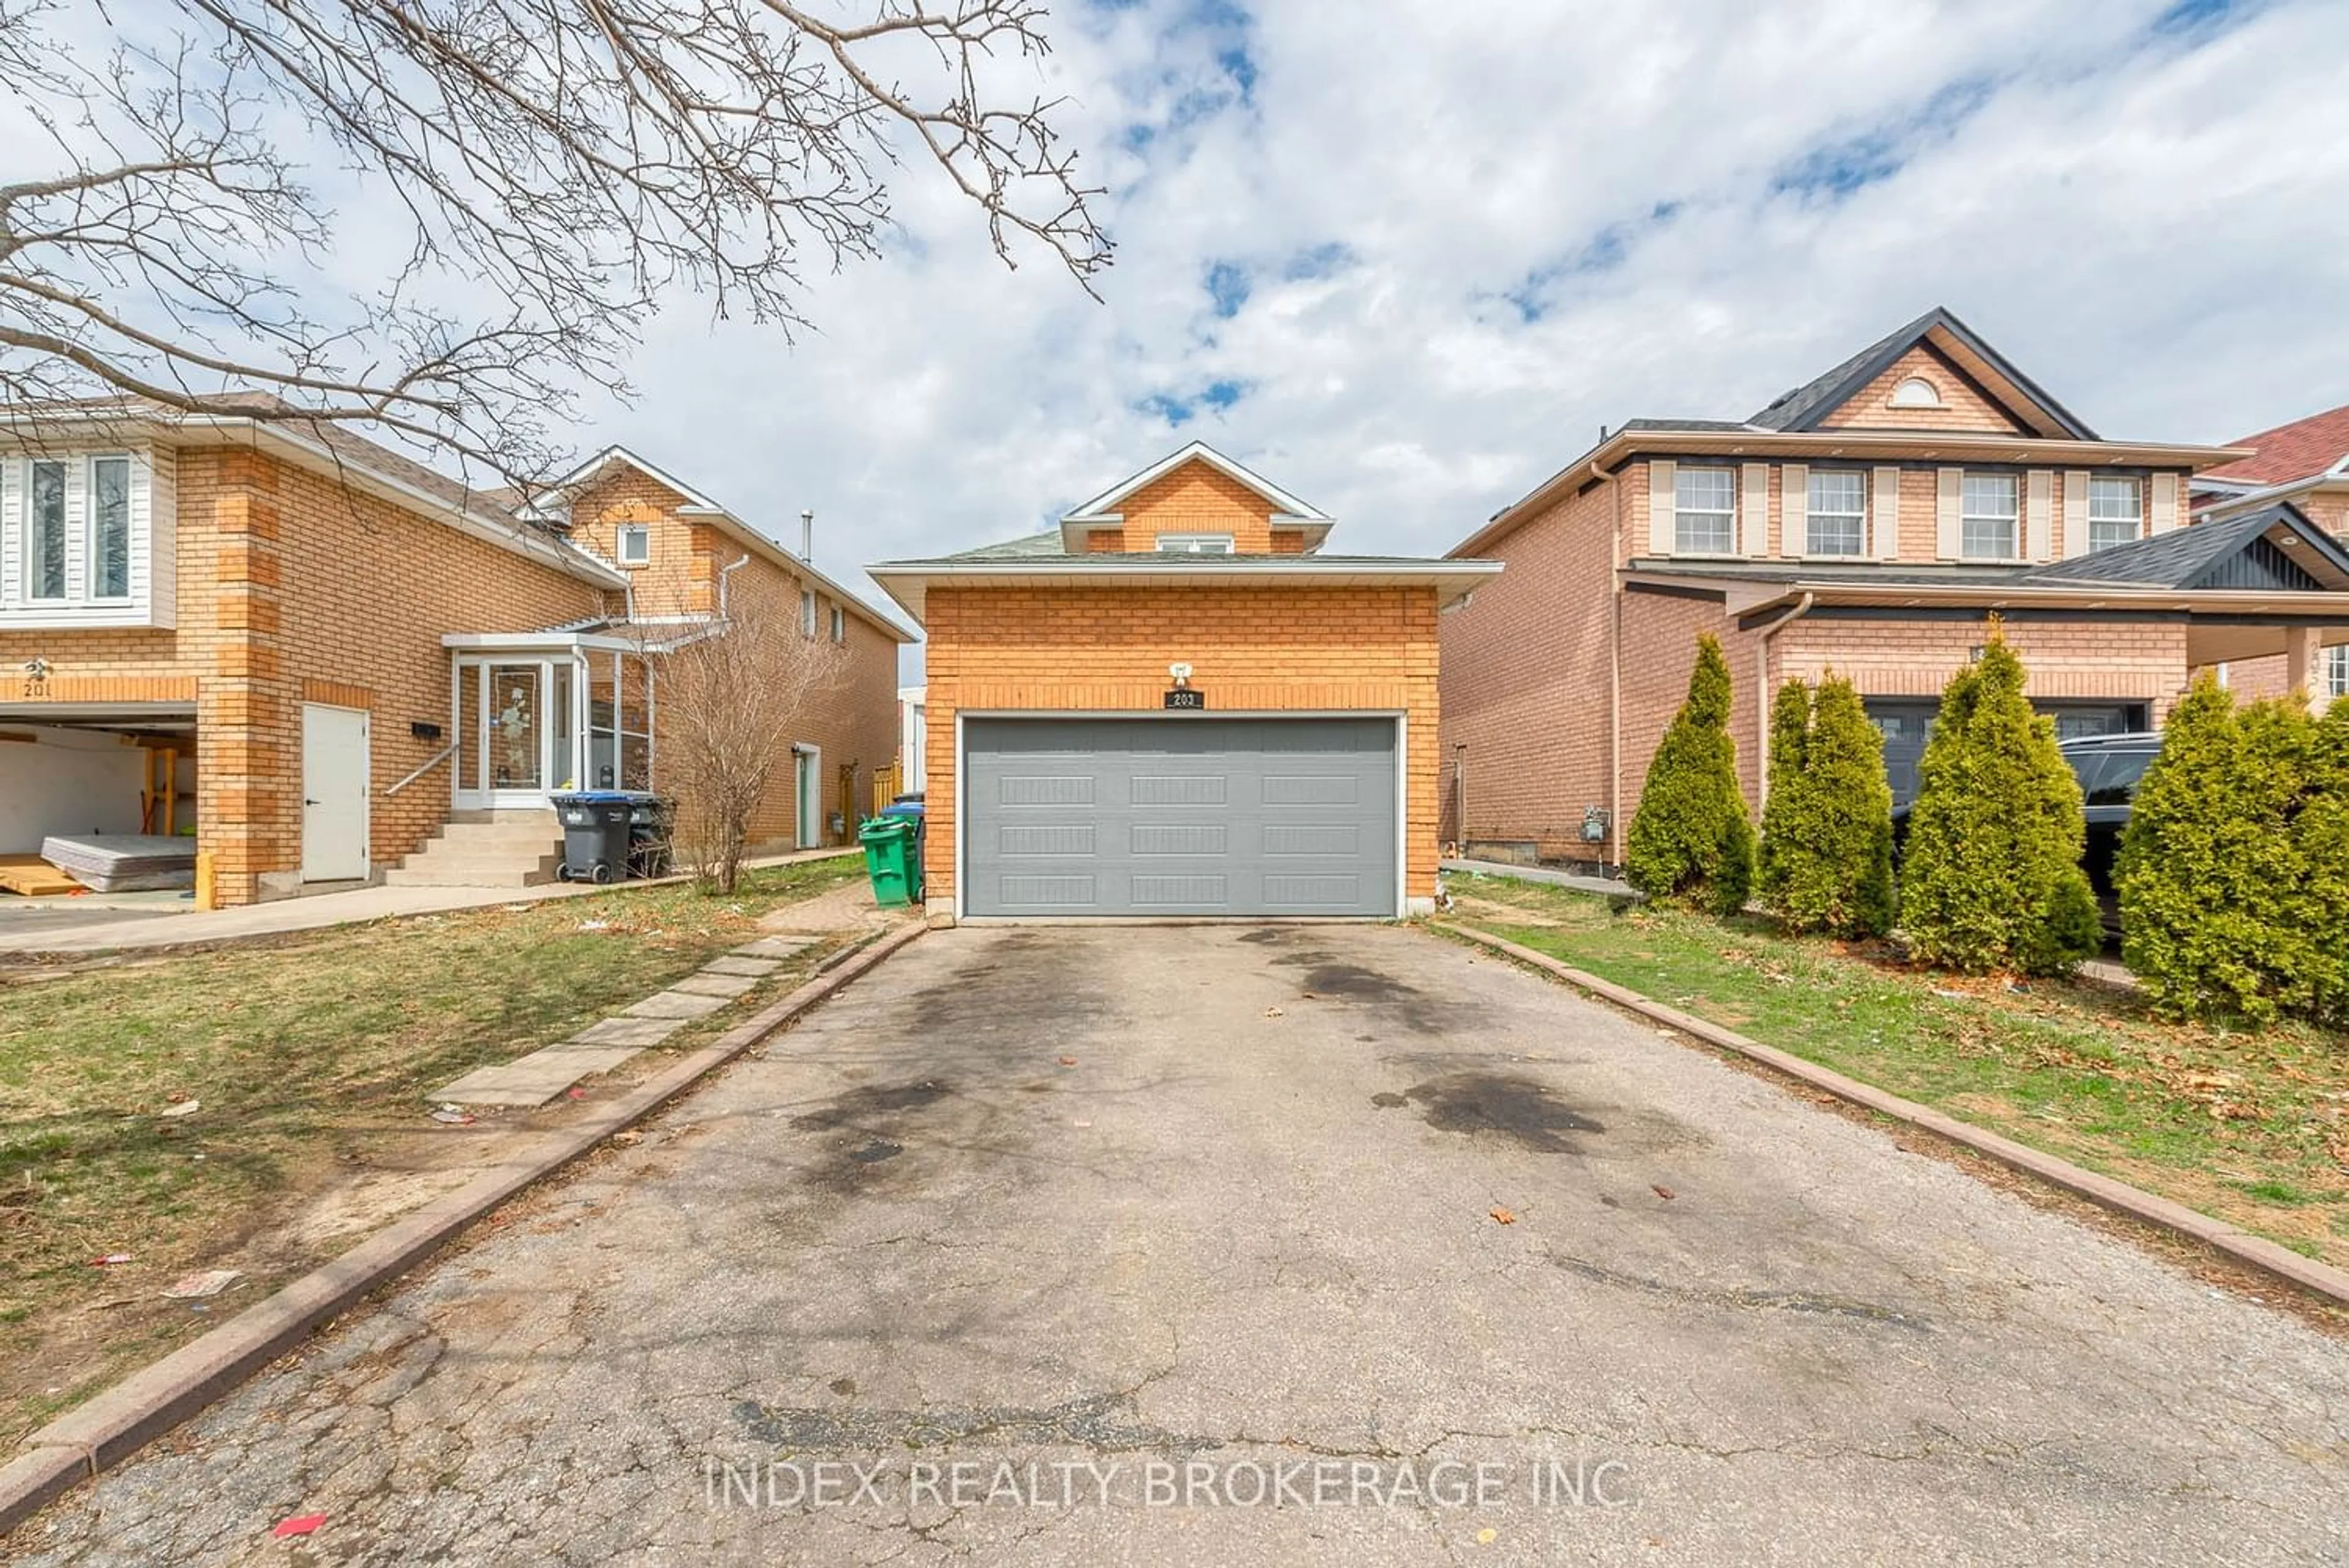 Frontside or backside of a home for 203 Richvale Dr, Brampton Ontario L6Z 4R6